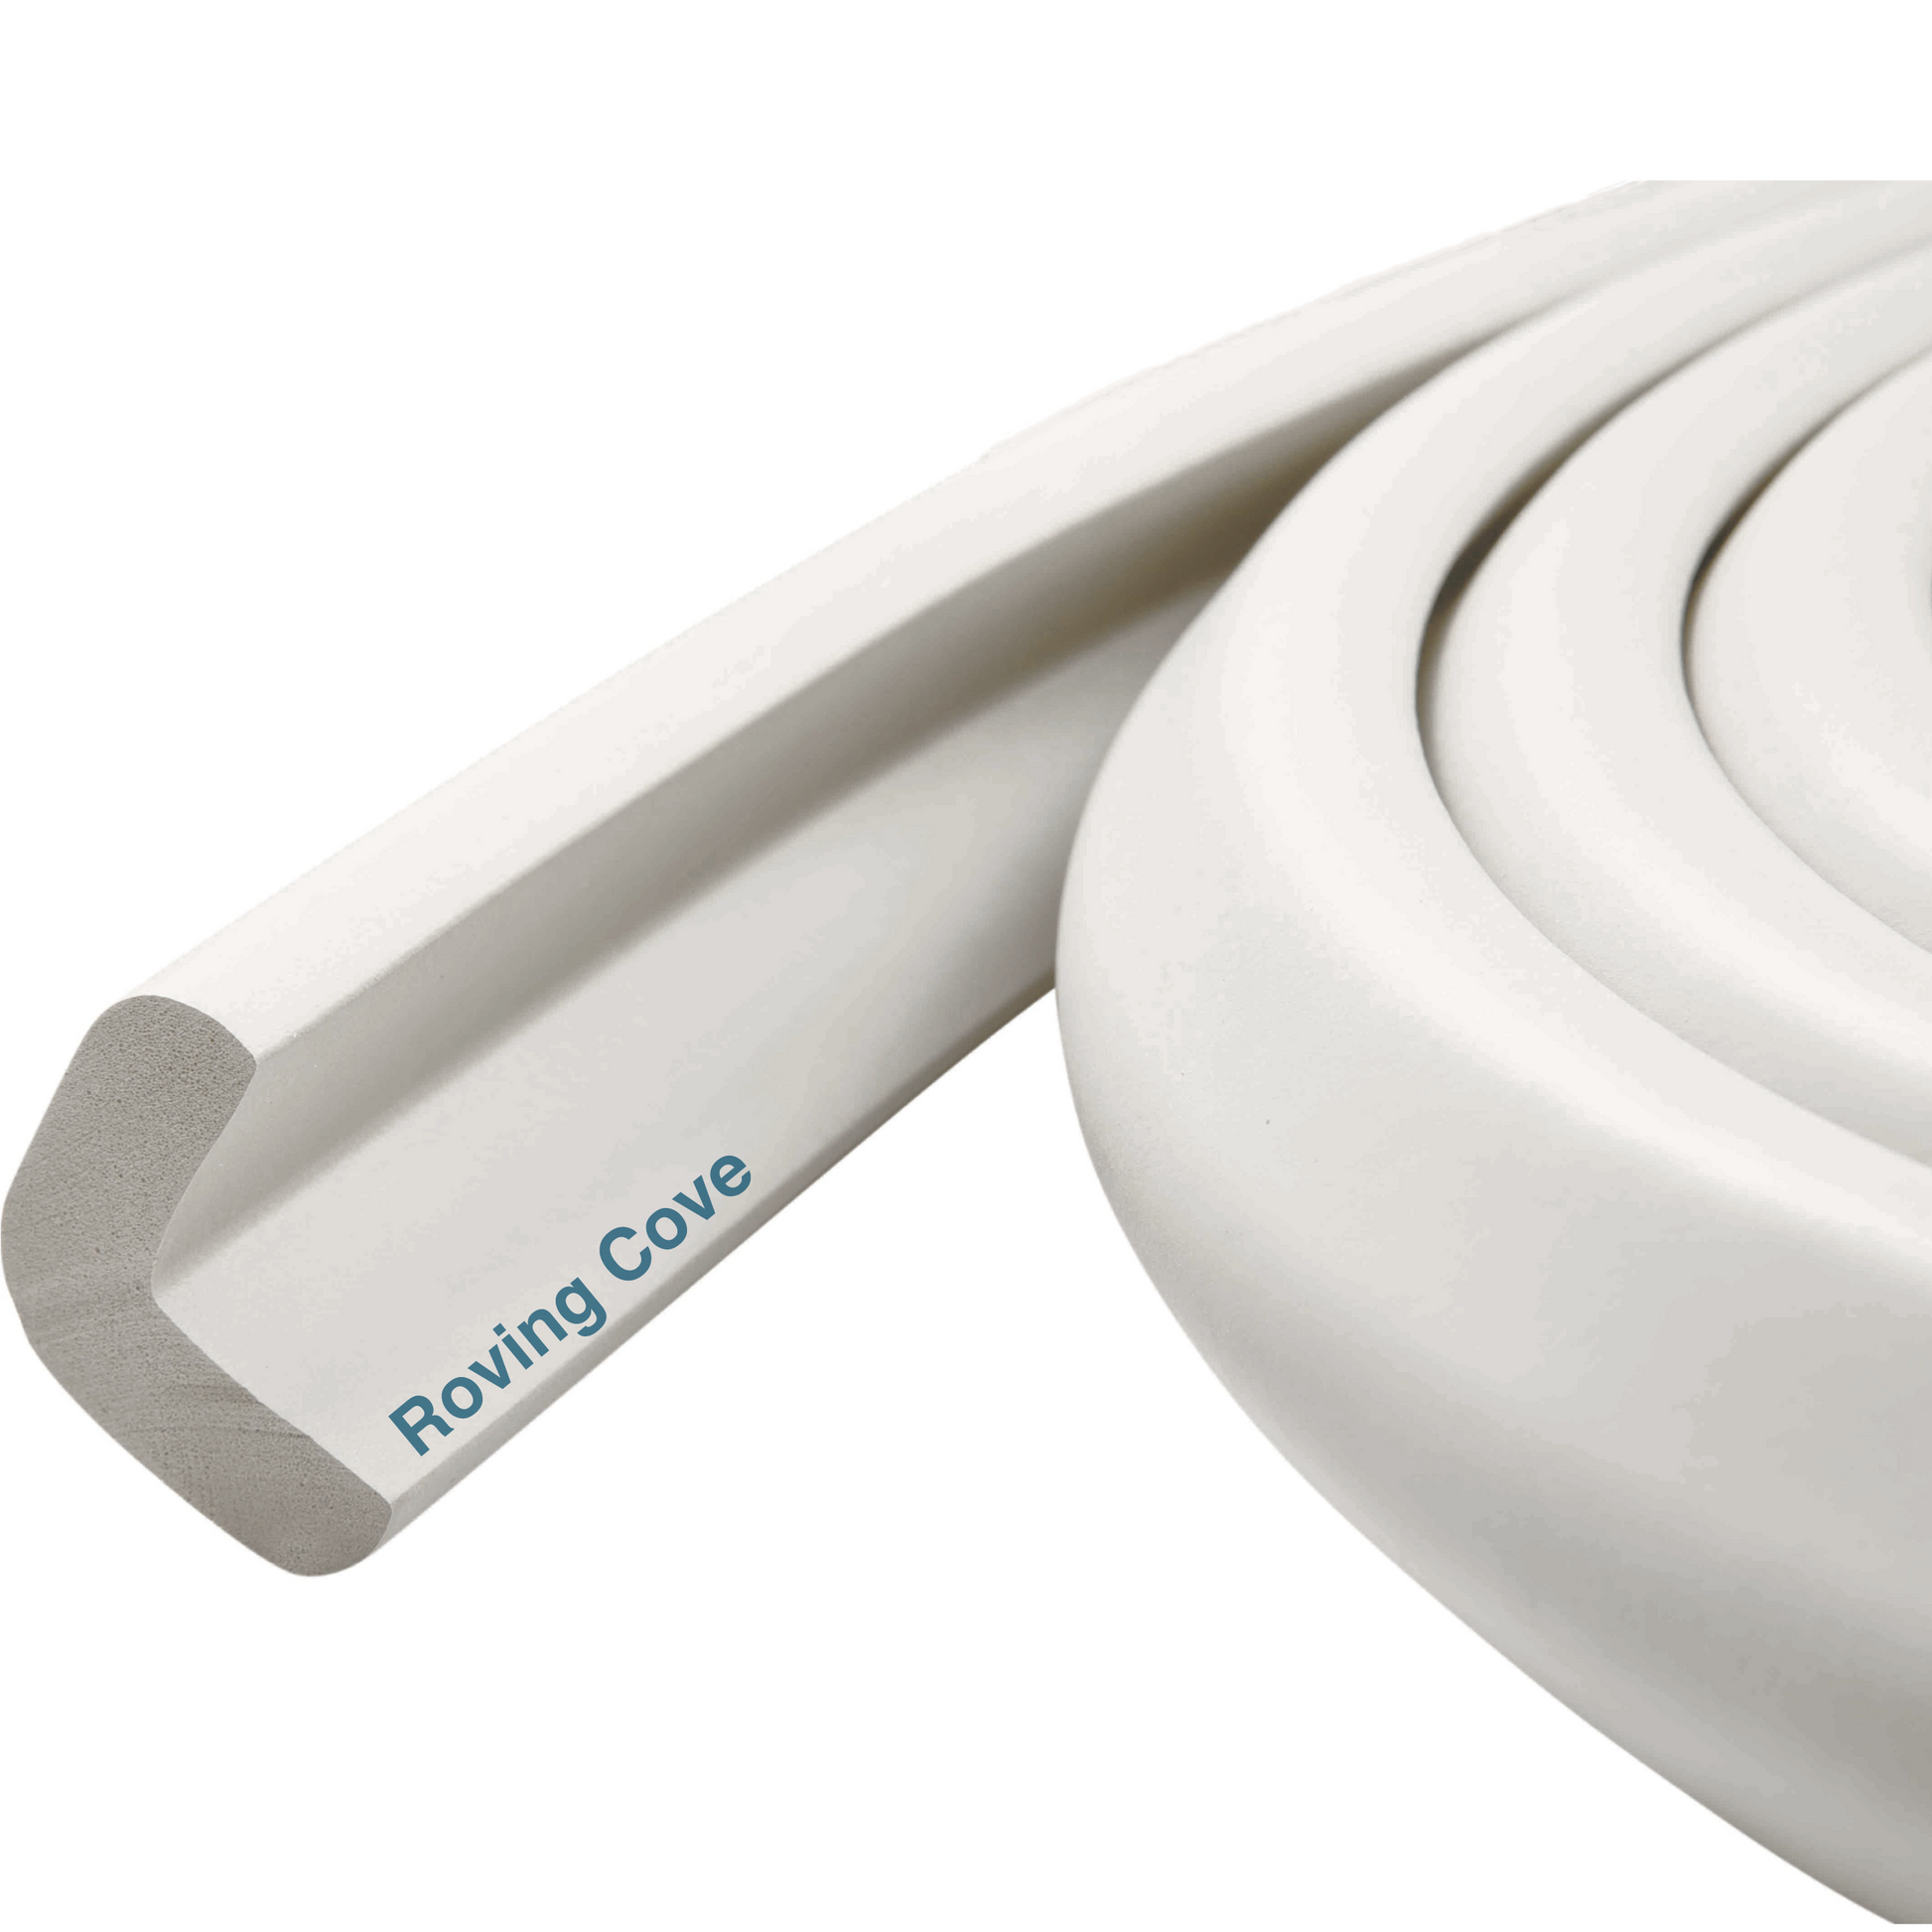 Roving Cove HeftyFit Edge Protector for Baby Proofing, Large 6ft Edge